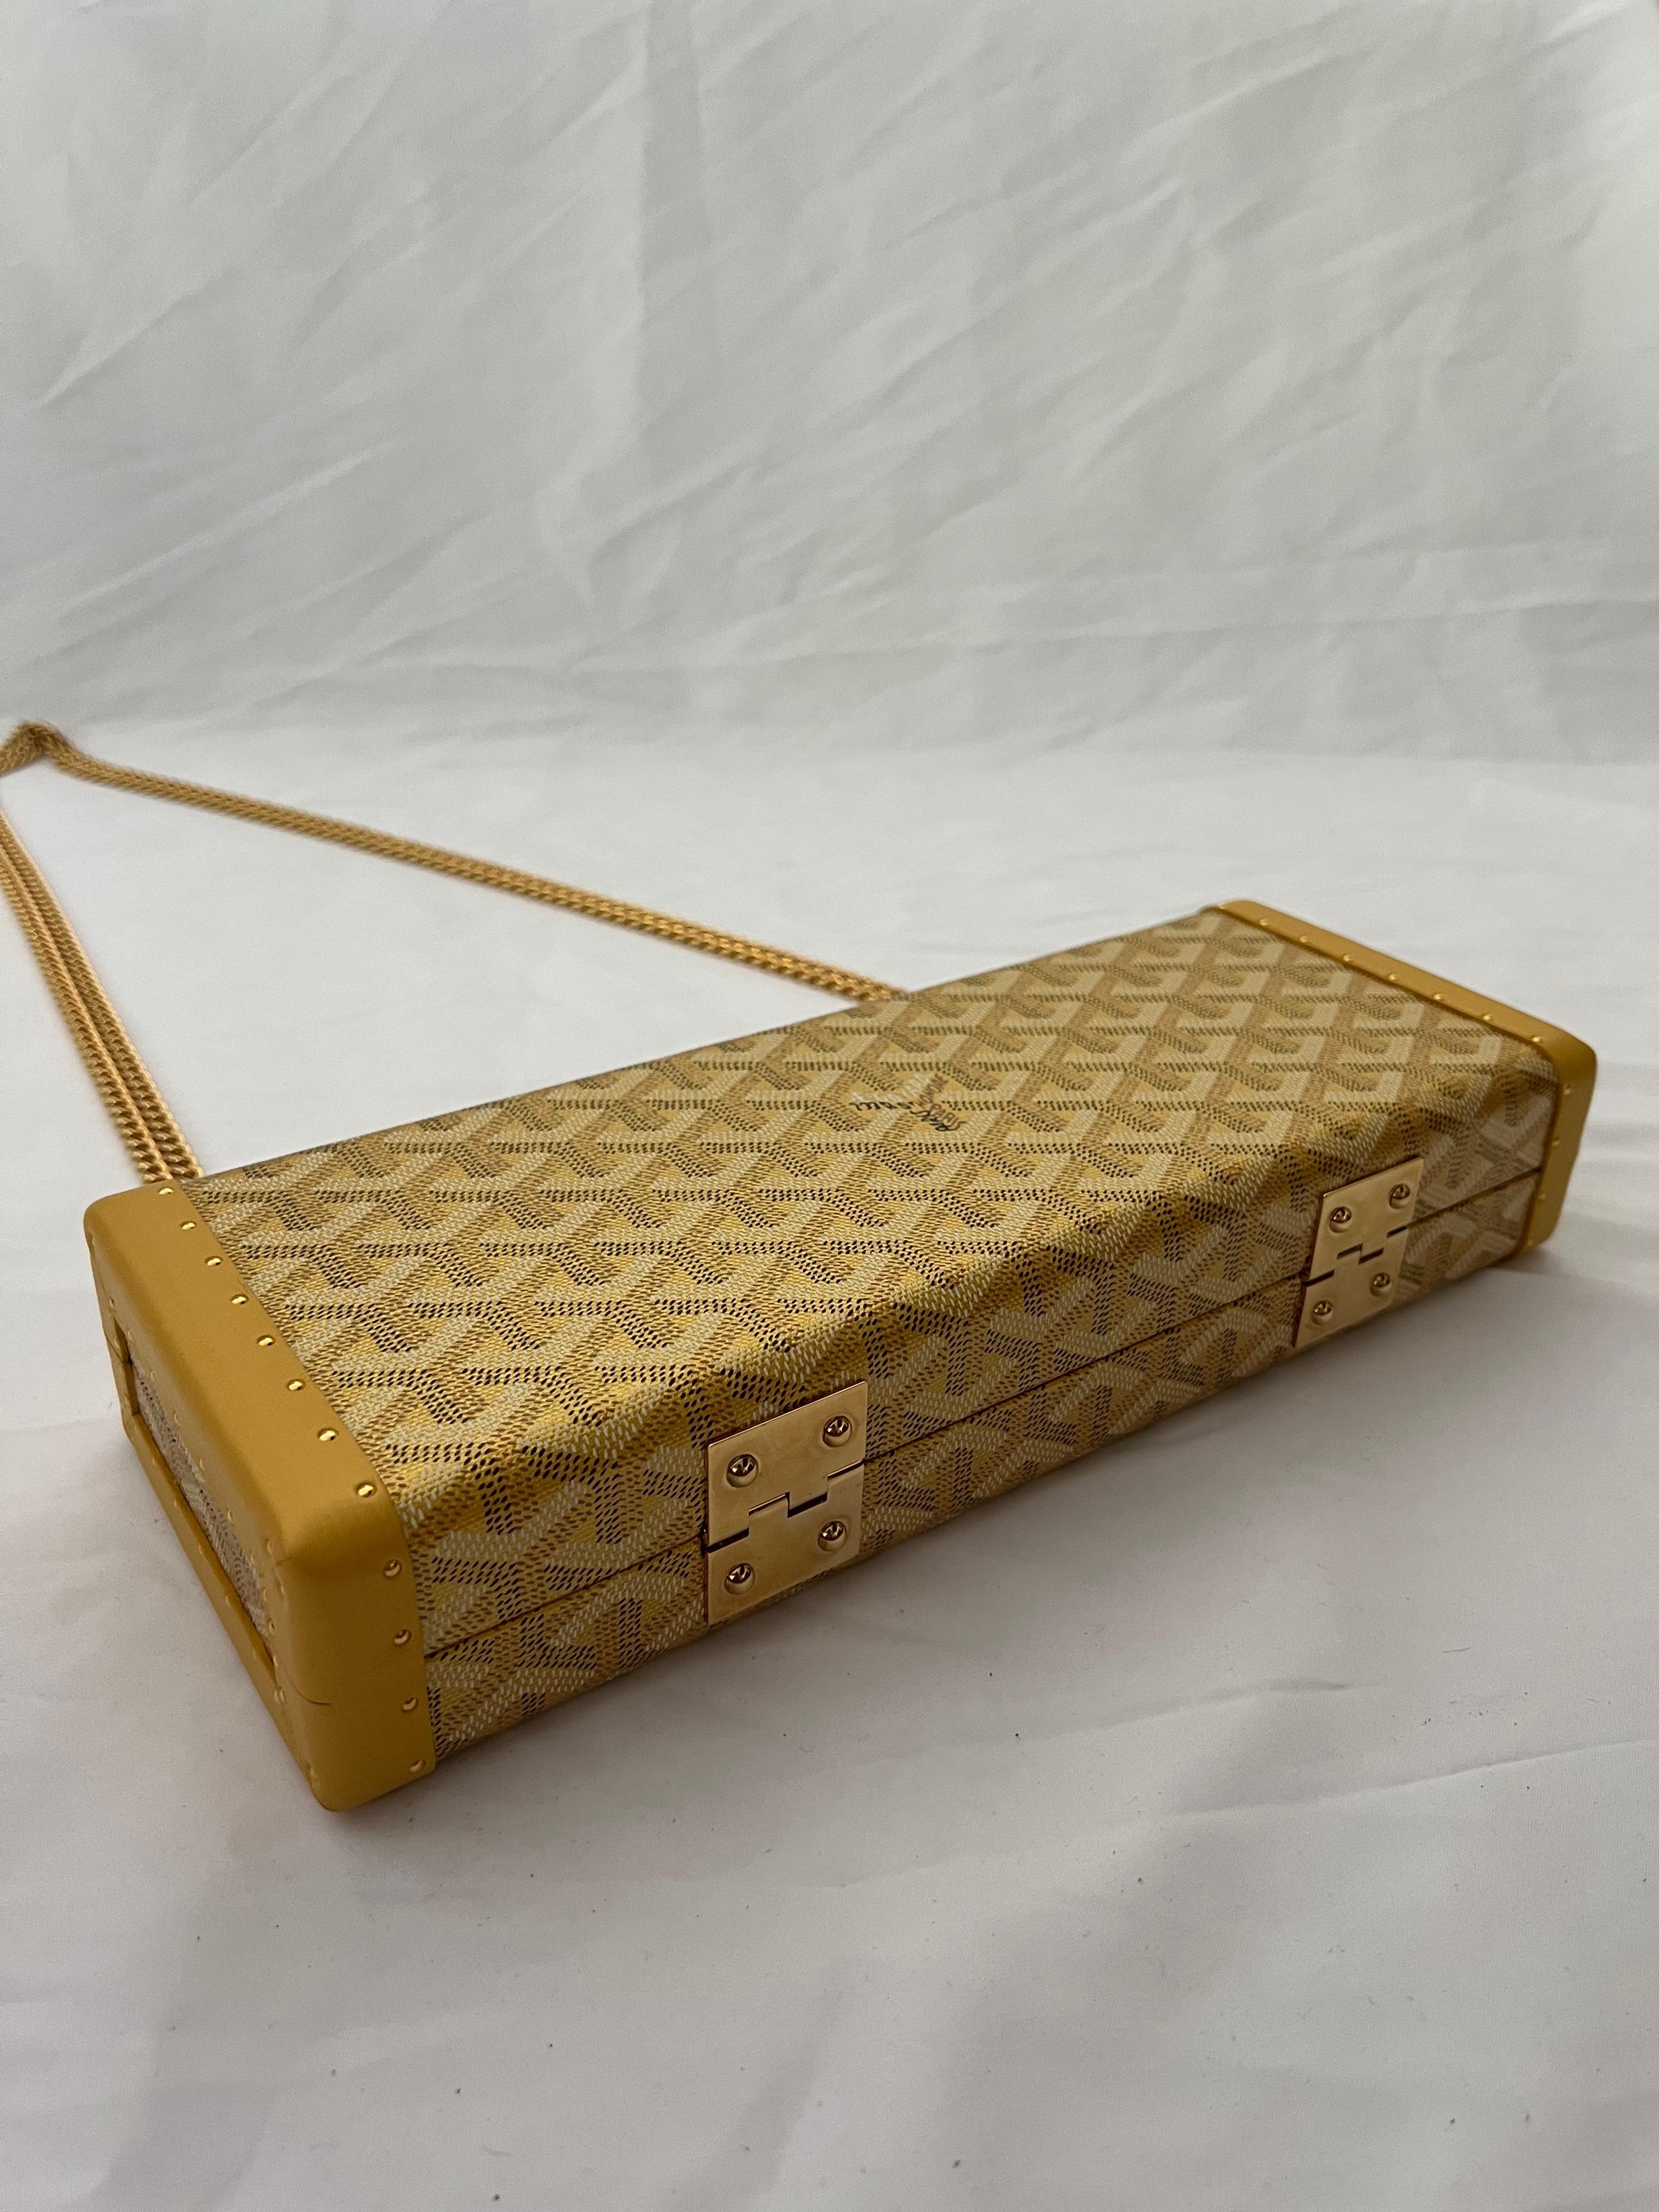 - Yellow/ Gold
- Signature Goyard print
- Gold tone hardware
- Removable chain link shoulder strap, drops 21.5”
- Double clasp closure on the top
- Single interior pocket
- Protective feet at the base
- Includes dust bag 
